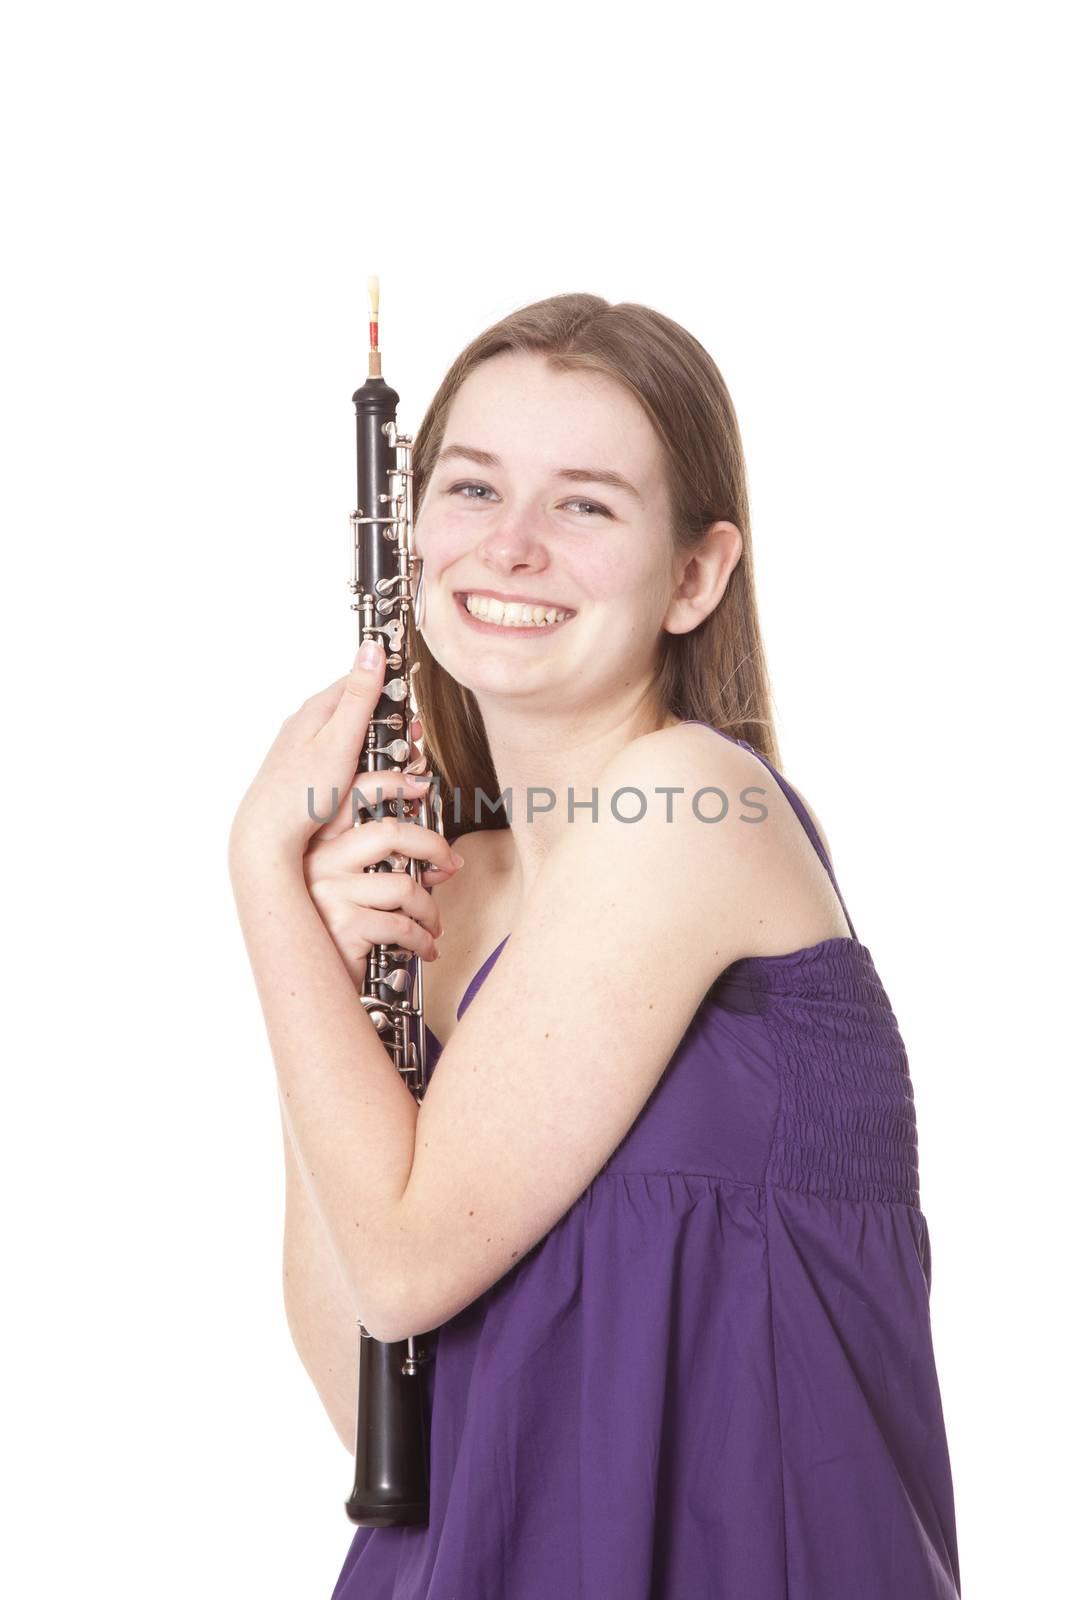 smiling girl in purple dress with oboe against white background